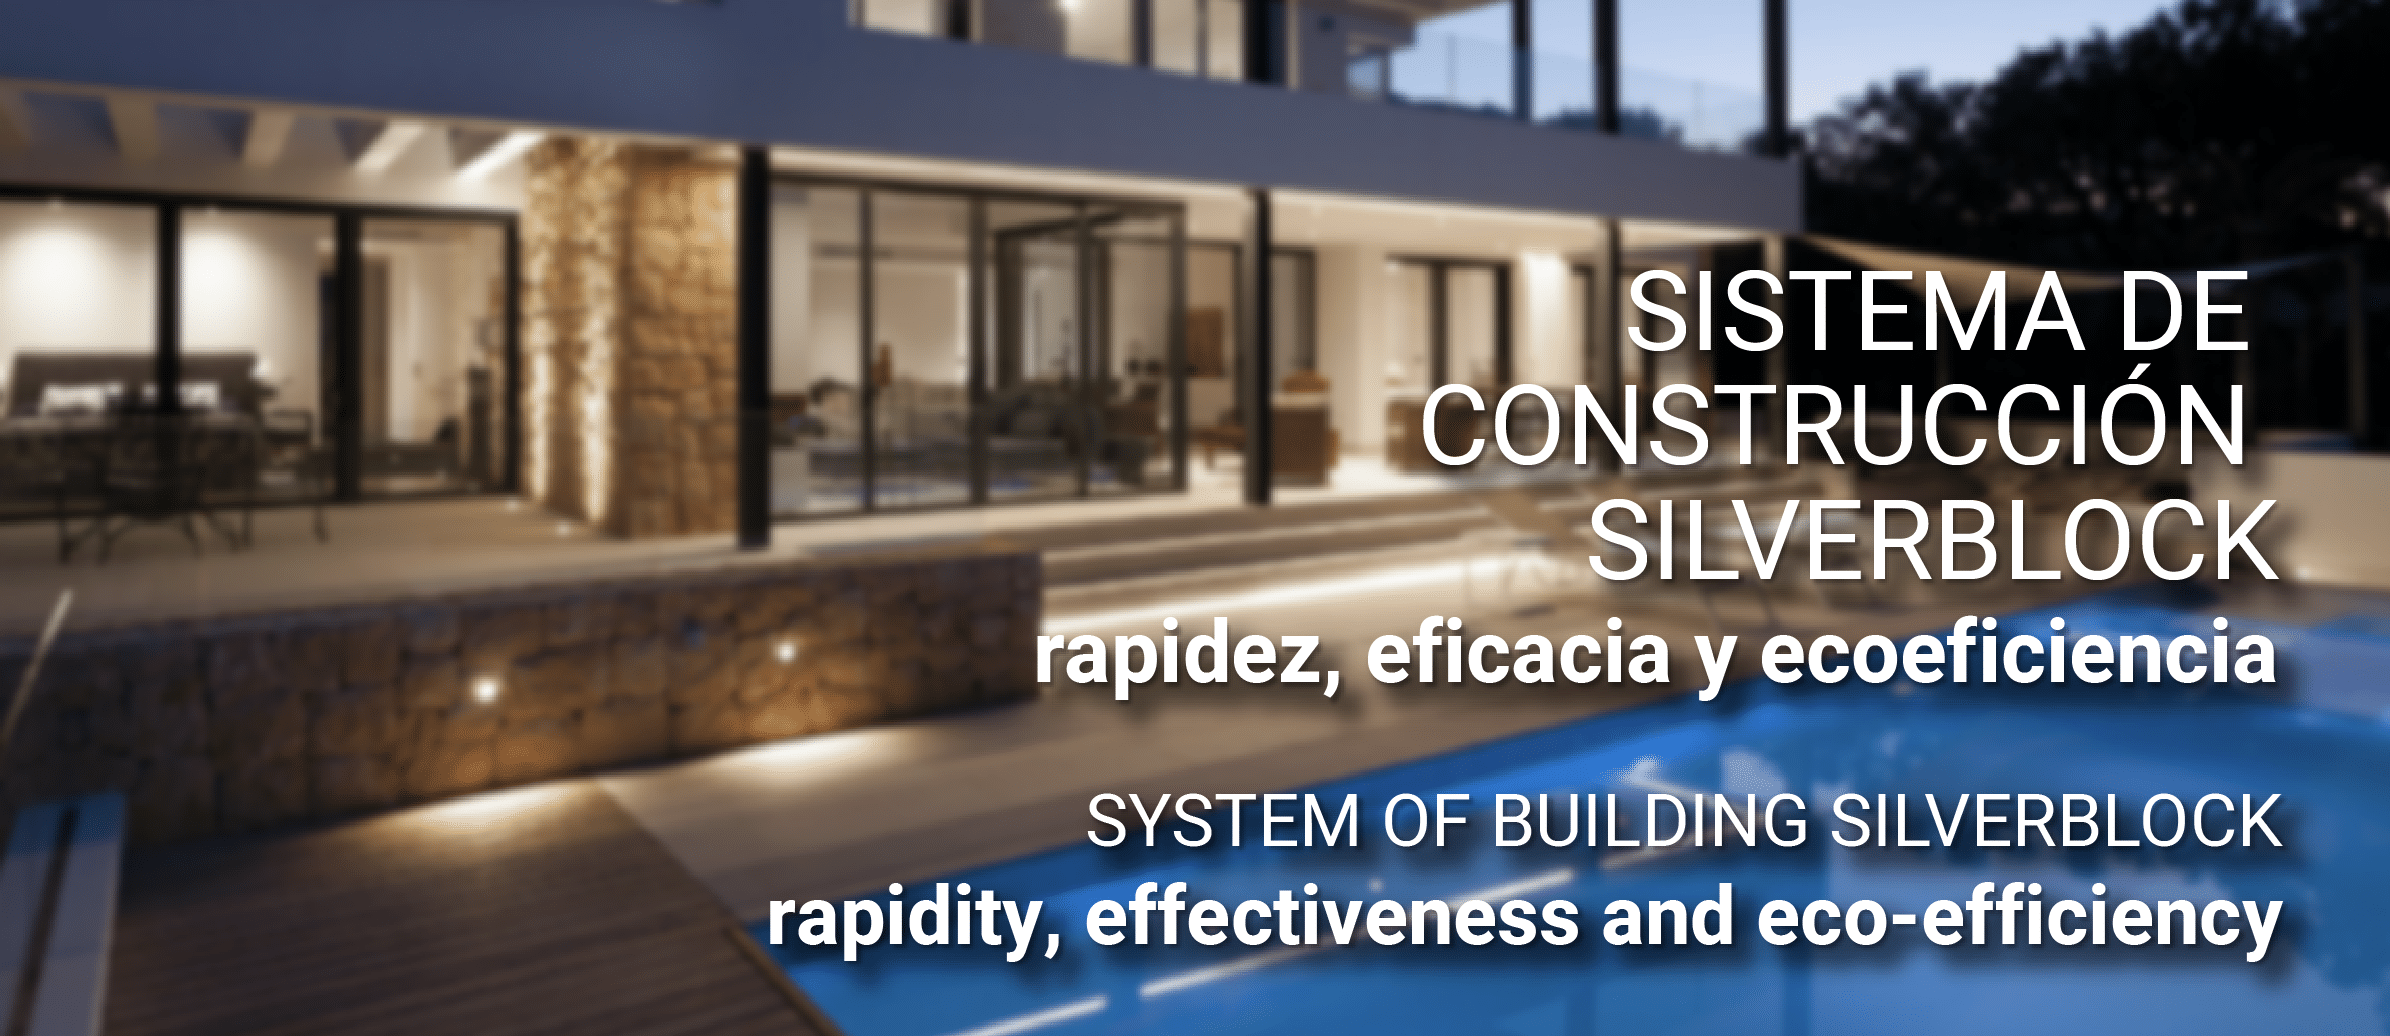 System of Building SilverBlock, rapidity, effectiveness and eco-efficiency